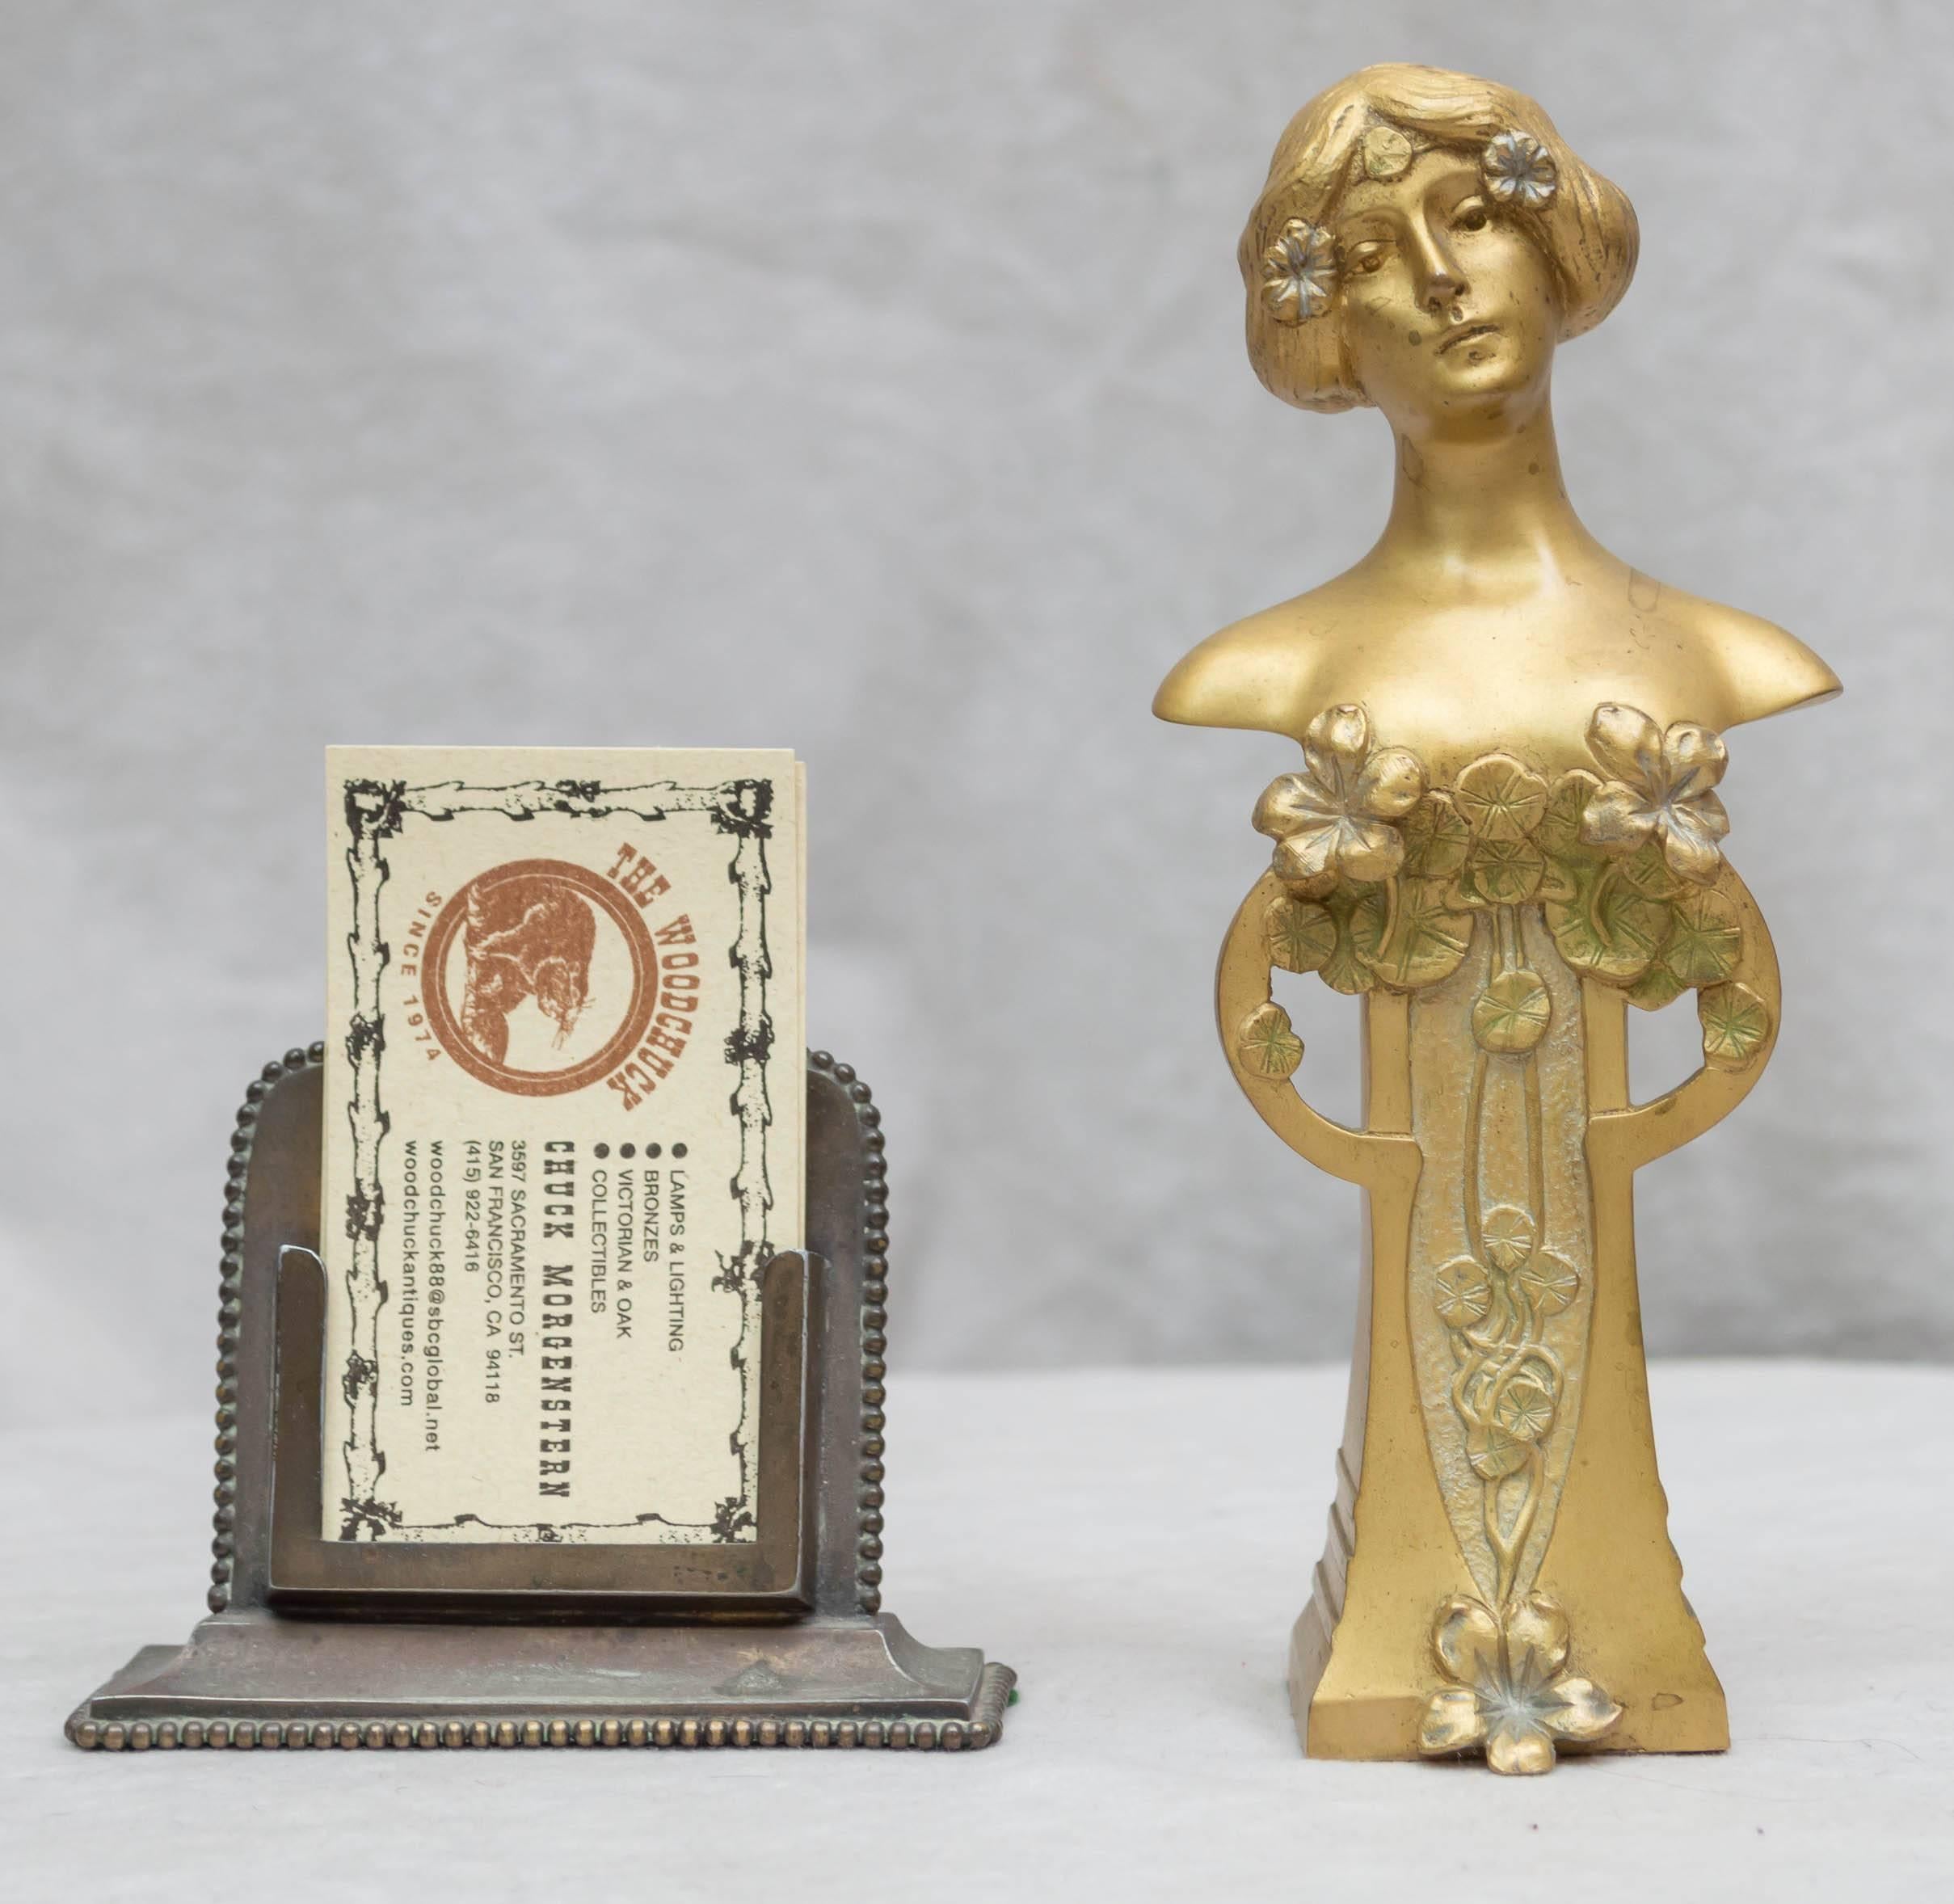 Our title basically gives you most of the information you need. This beautiful little bust is done by Charles Korschann, one of the great artists of the secessionist movement. In addition to his signature, you will find the 